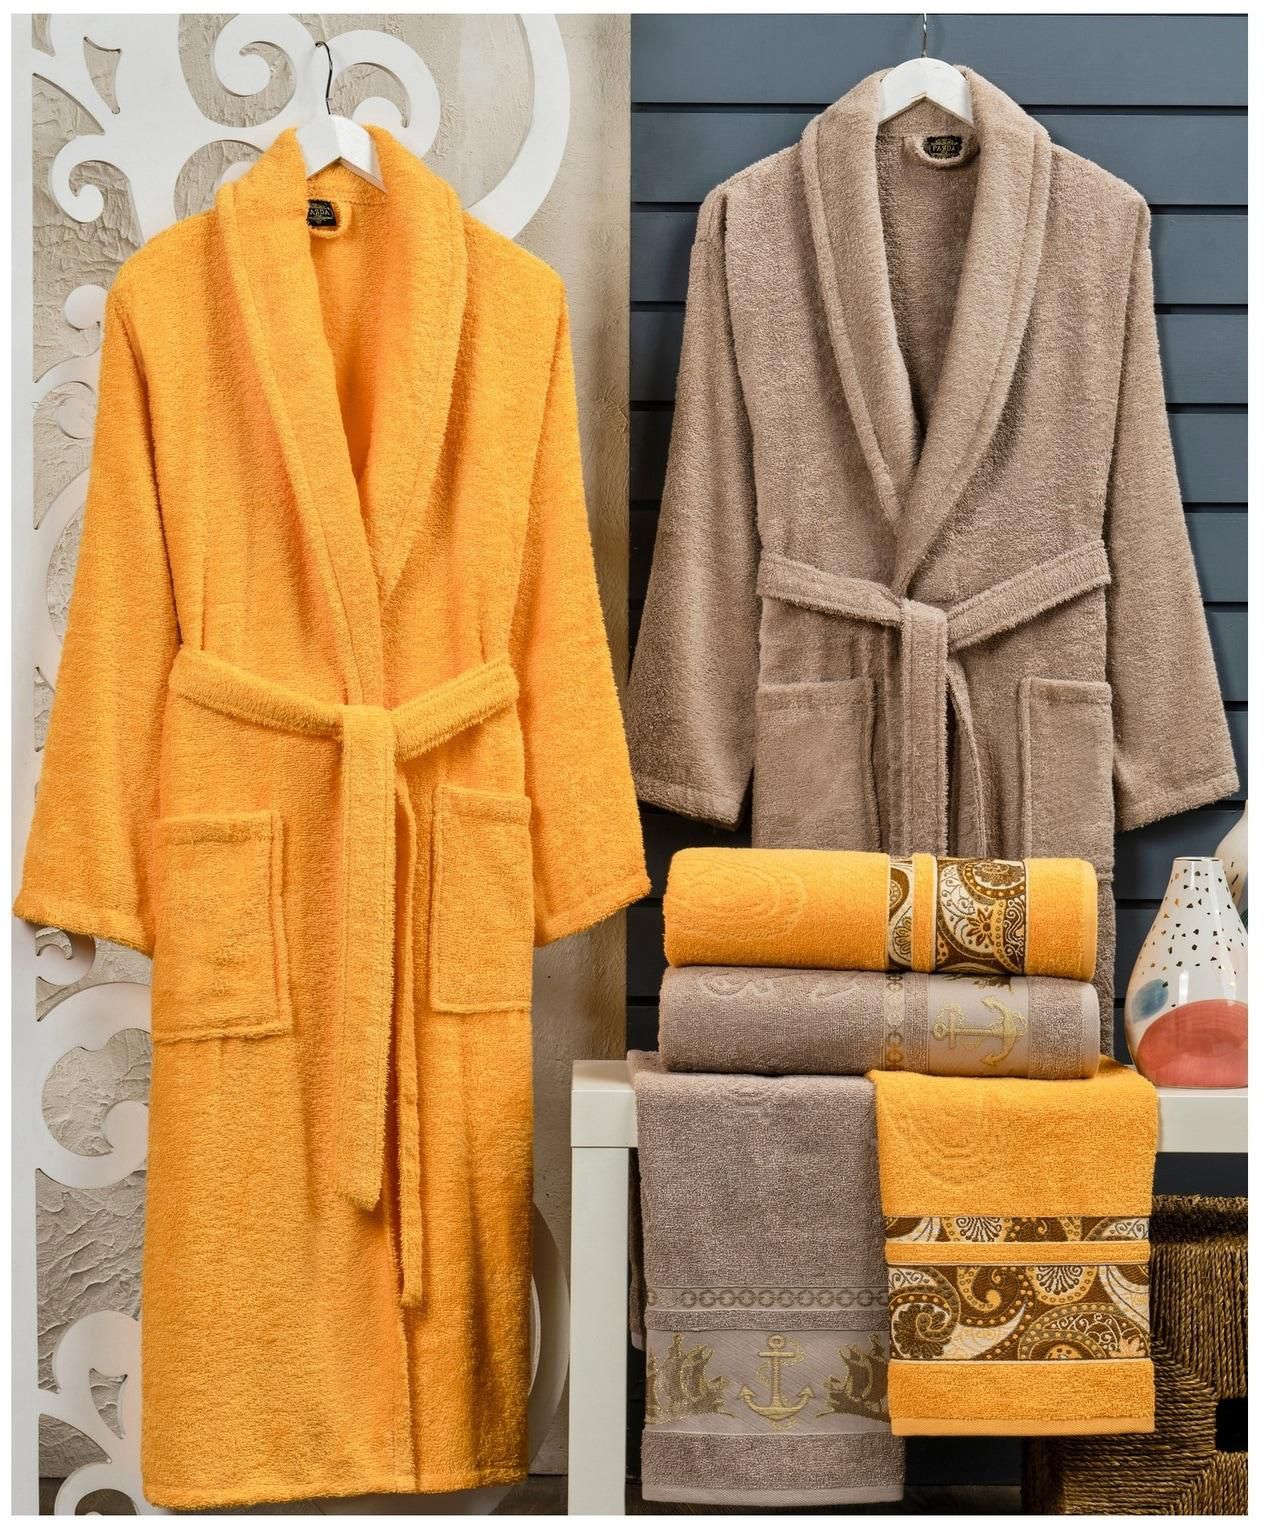 Parda 6-Piece Turkish Terry Cotton Couple/Family Bathrobe Set 480gsm Bridal Shower Gift Set With Matching Bath Sheets And Hand Towels - Orange-Beige